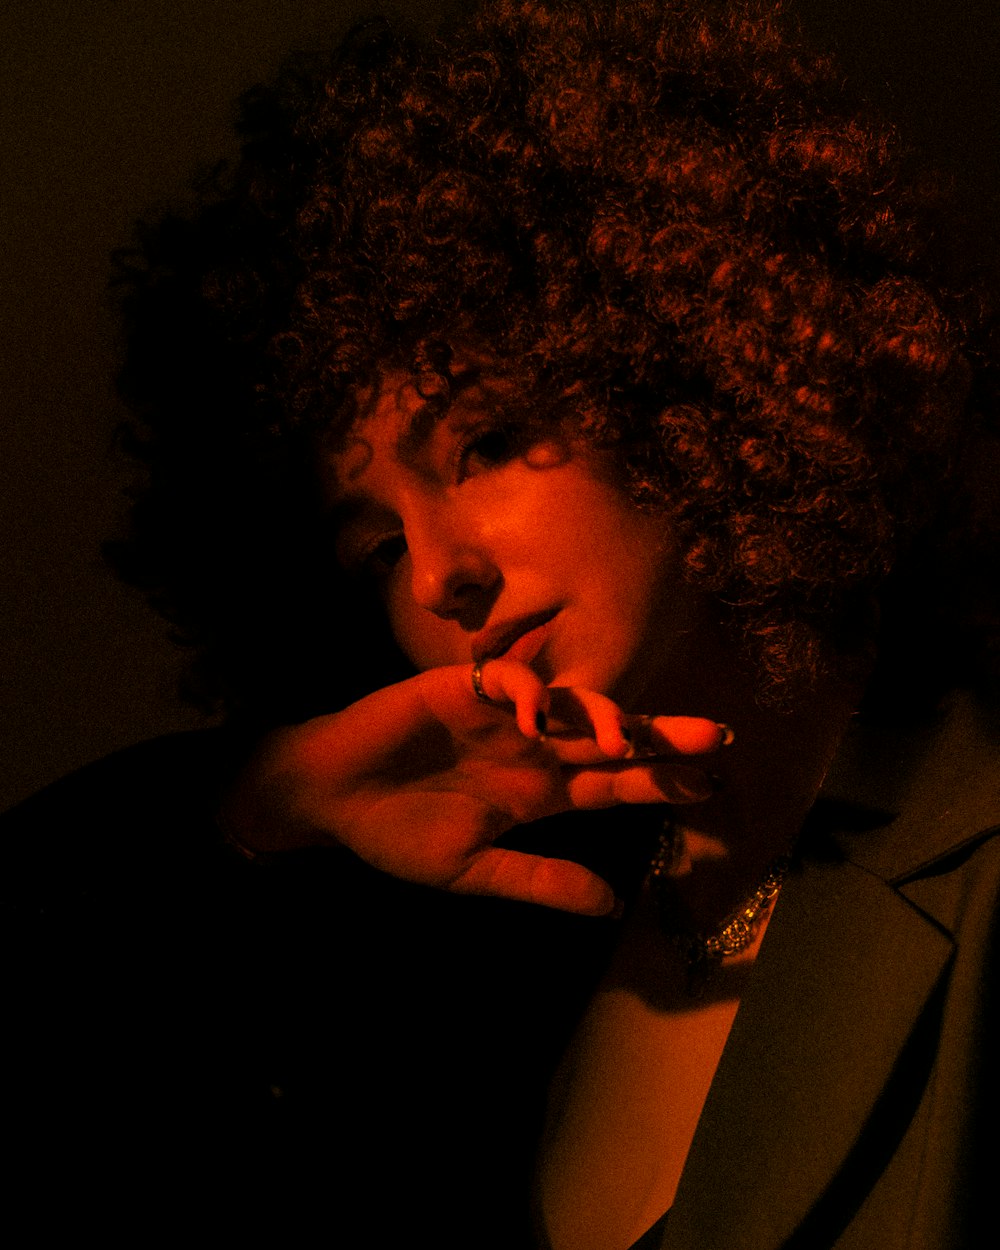 a woman with curly hair smoking a cigarette